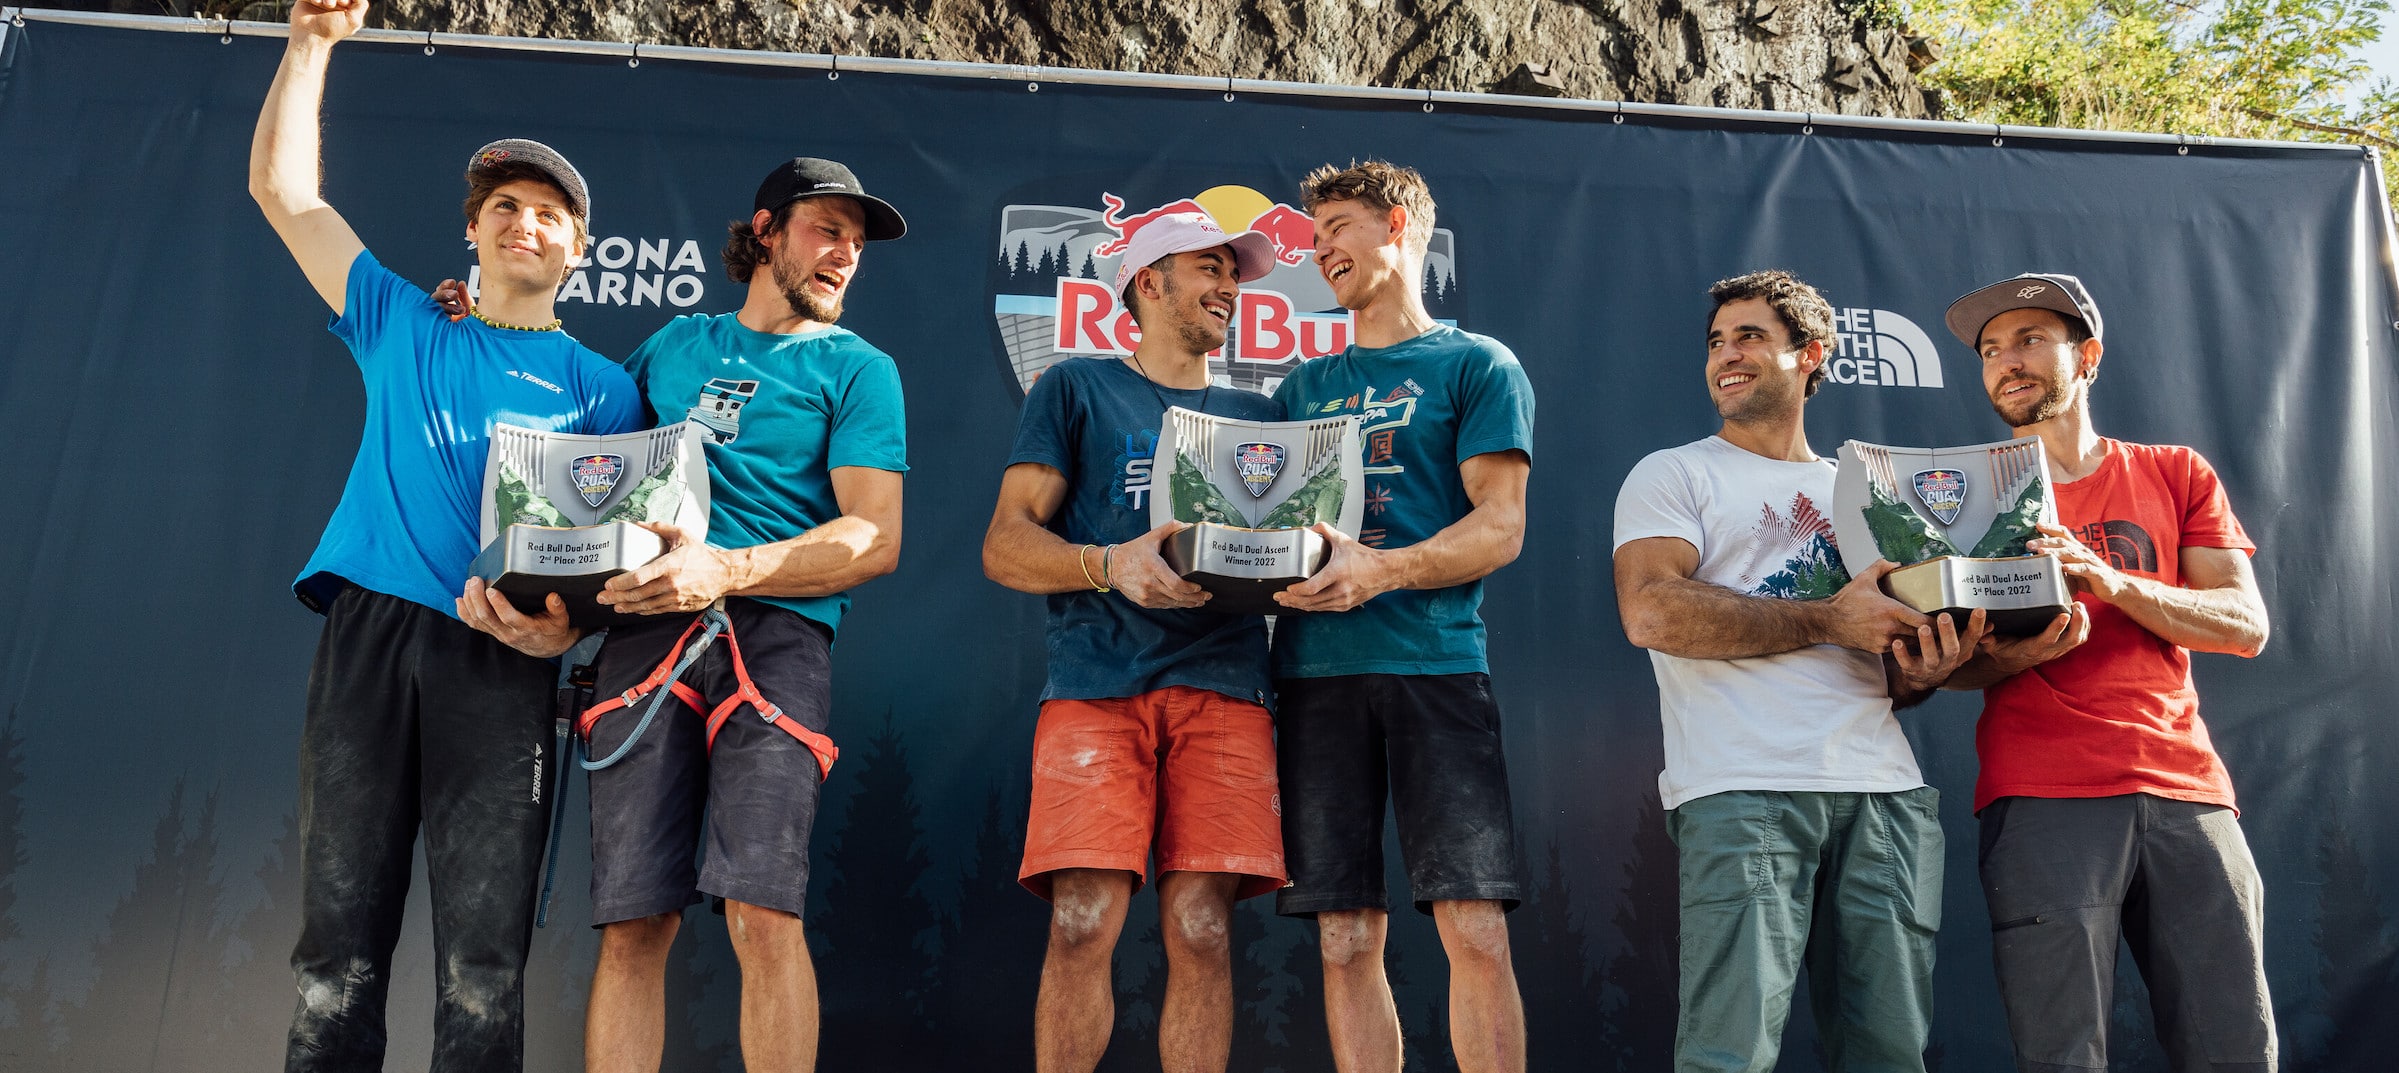 Winners celebrate on the podium at red bull dual ascent event in verzasca, switzerland on october 29th 2022